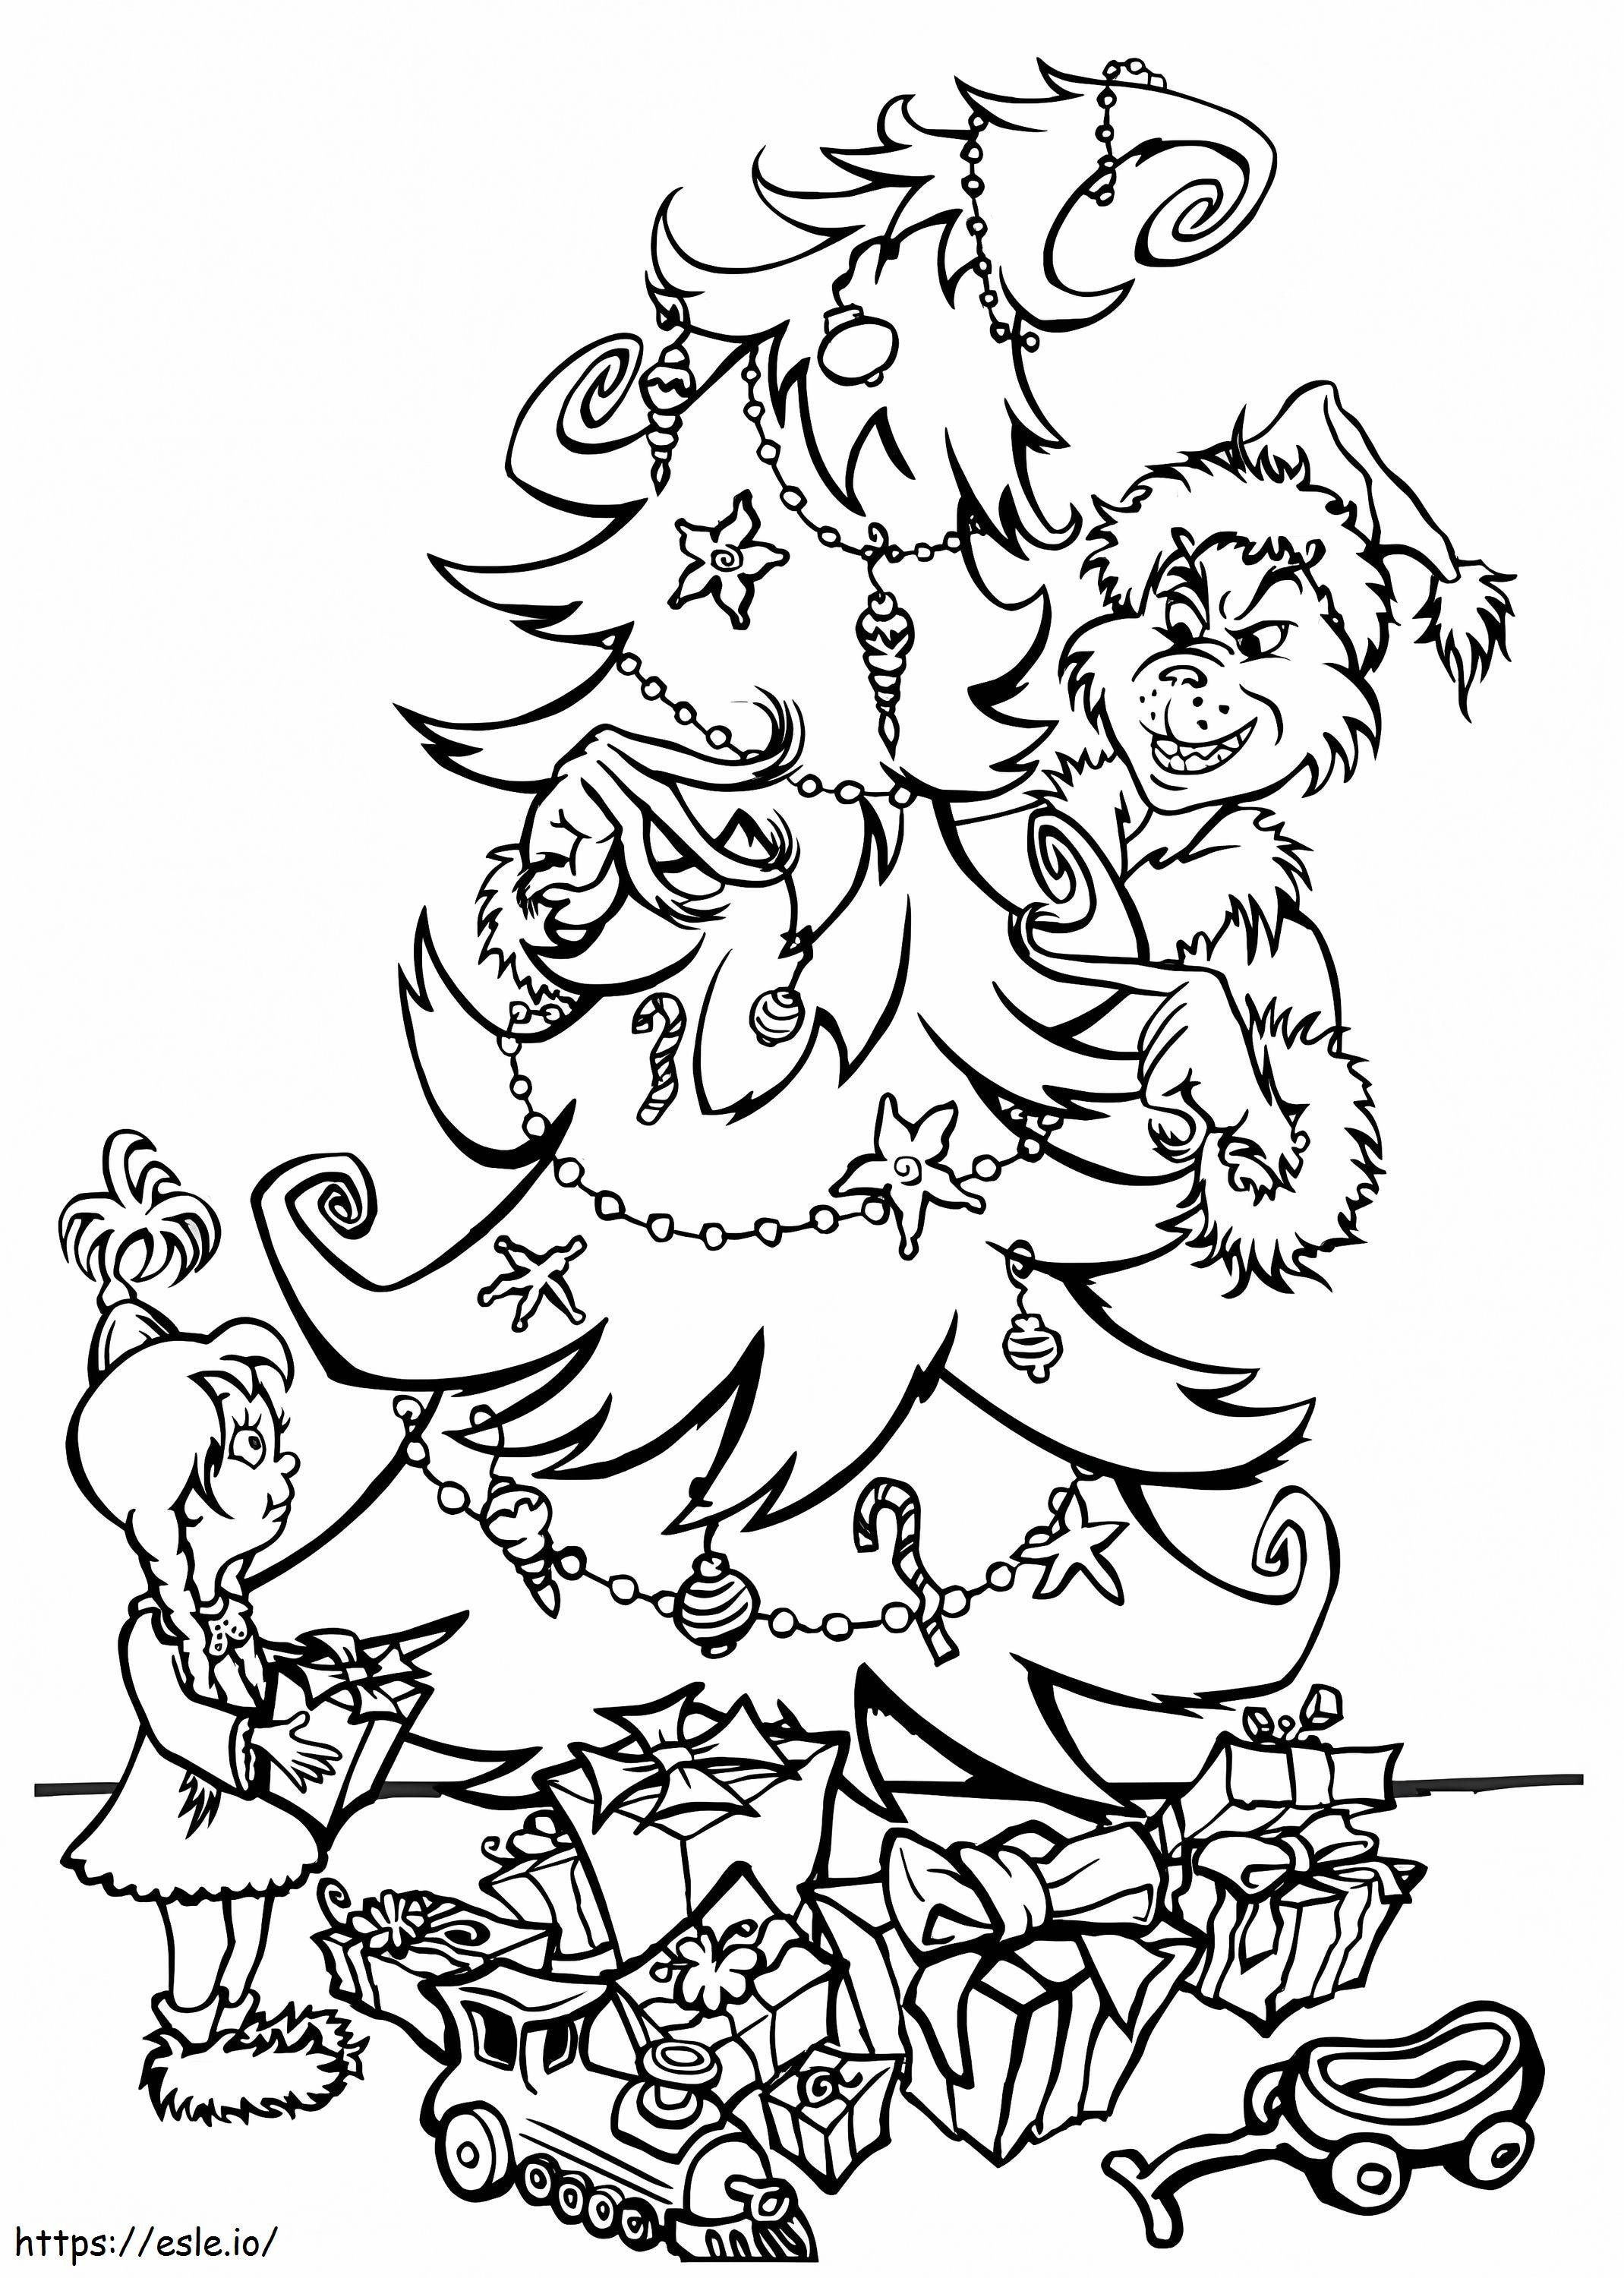 Grinch Decorates The Christmas Tree coloring page